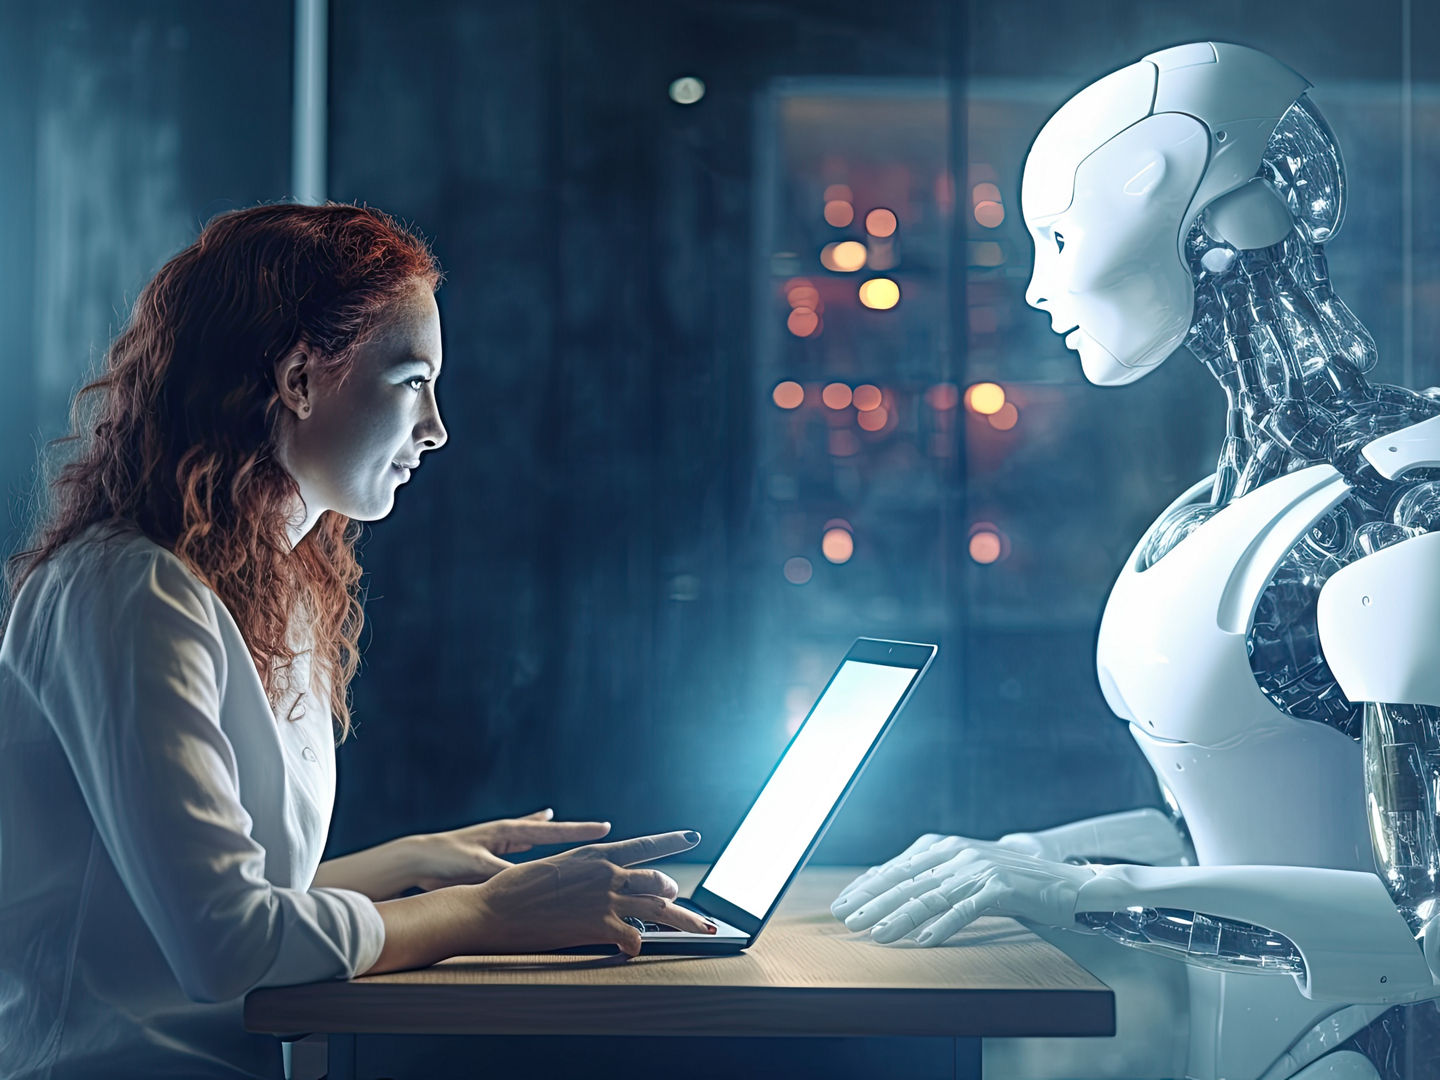 Person interacting with an AI-powered assistant on a computer or mobile device, with the AI providing helpful suggestions